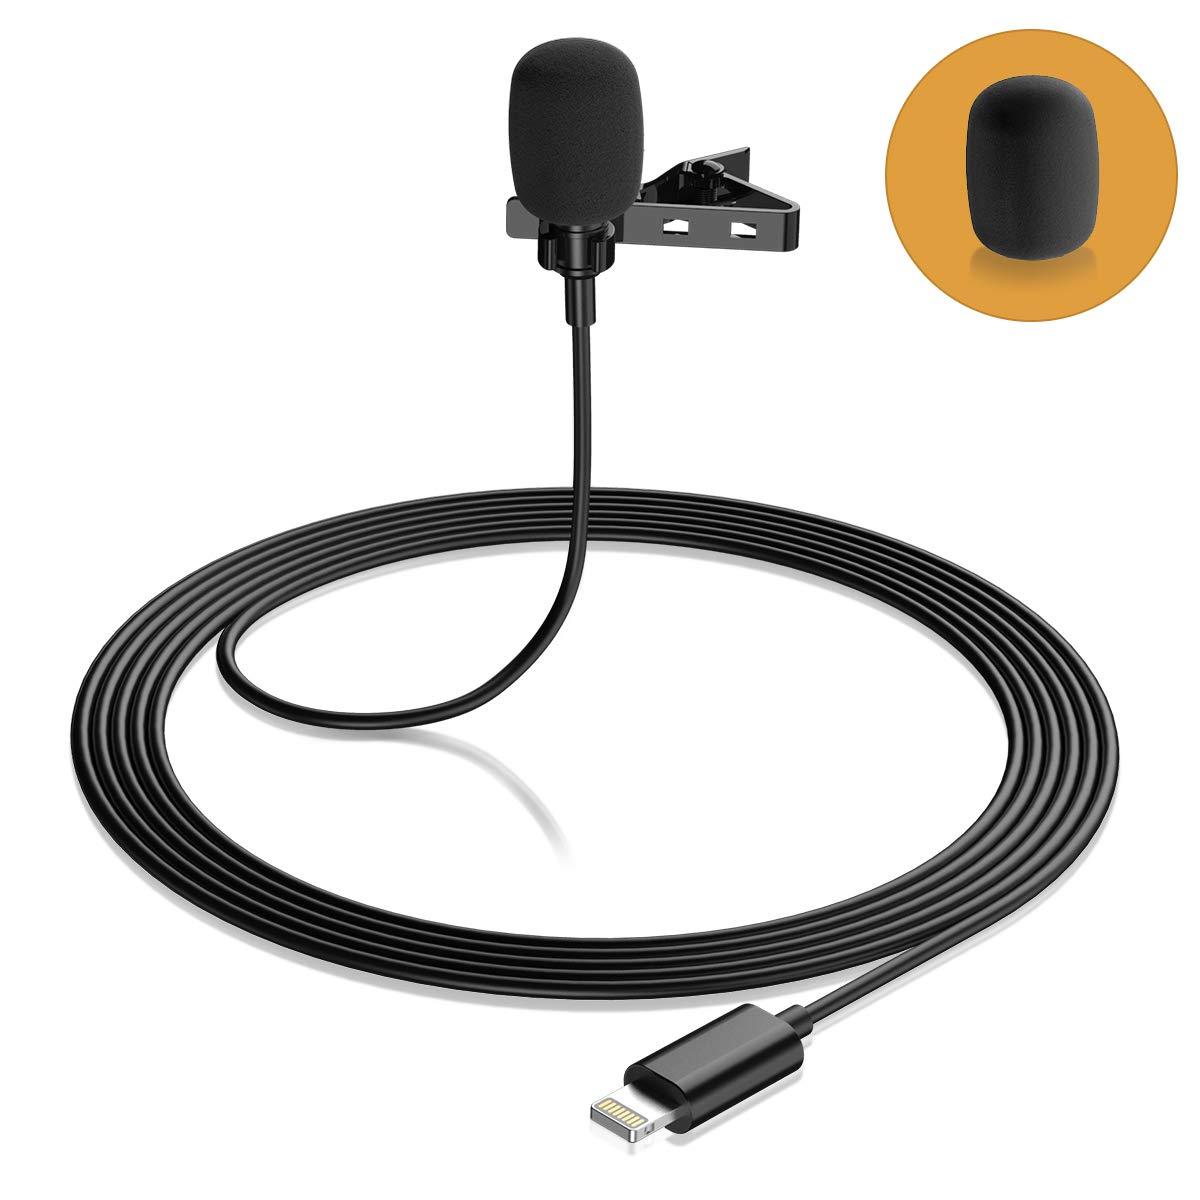 iPhone,　Lapel　Phone,　Professional　Lavalier　for　for　Eafing　On　Microphone　Microphone　Lav　Podcast/YouTube/Interview/Vlog/Video/Lecture　(79ft)　Mic　for　Clip　Recording